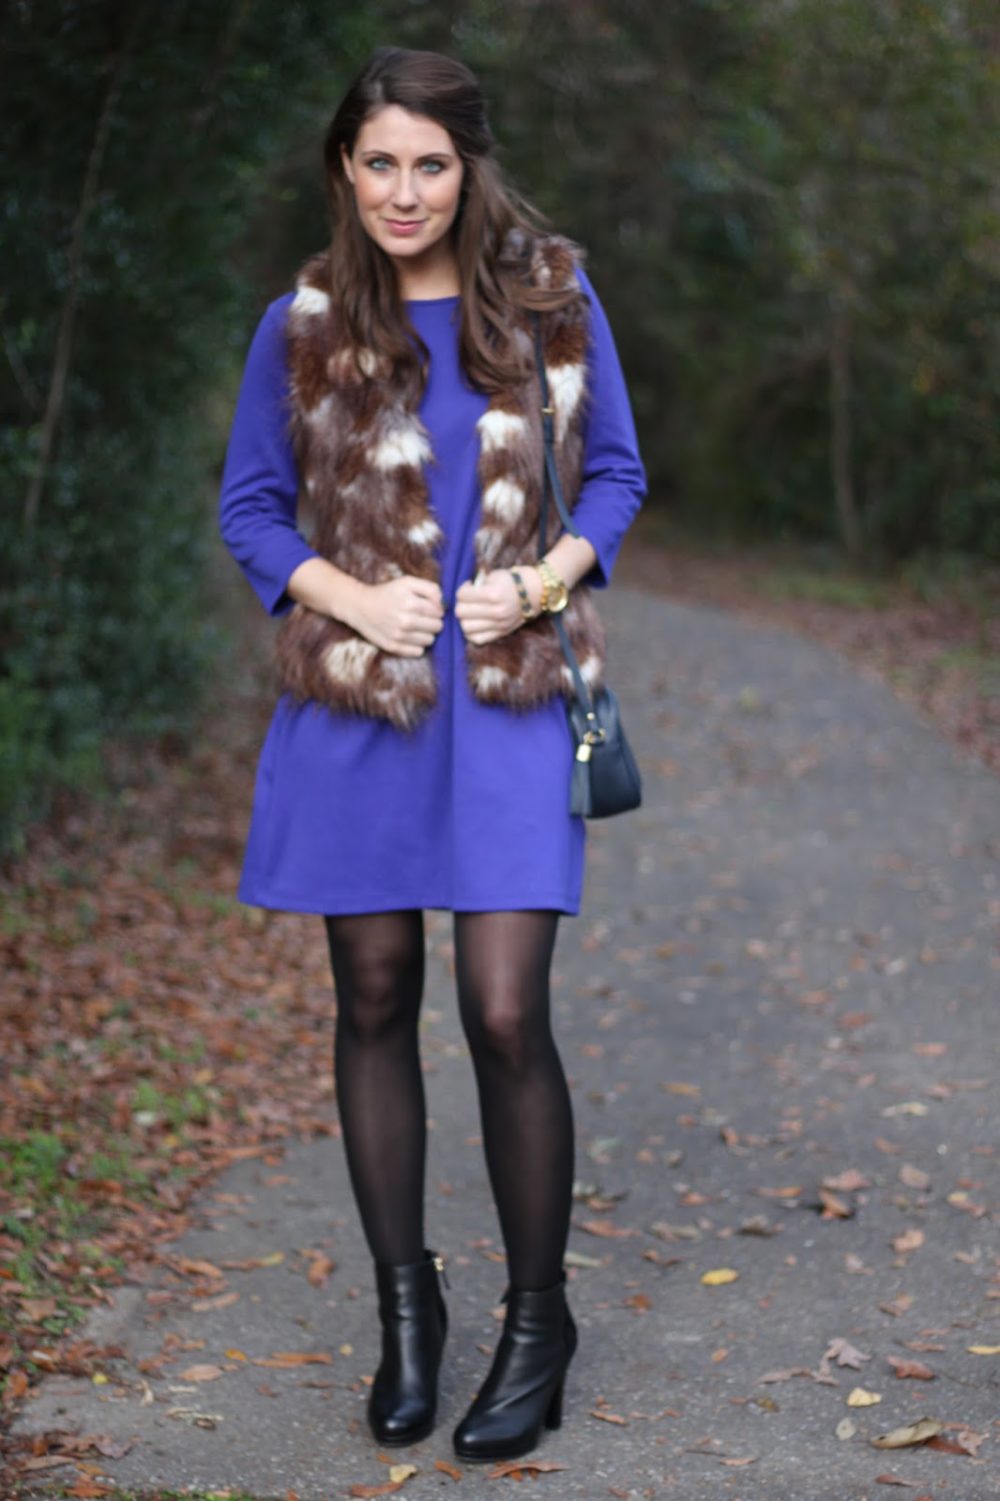 shift dress with tights